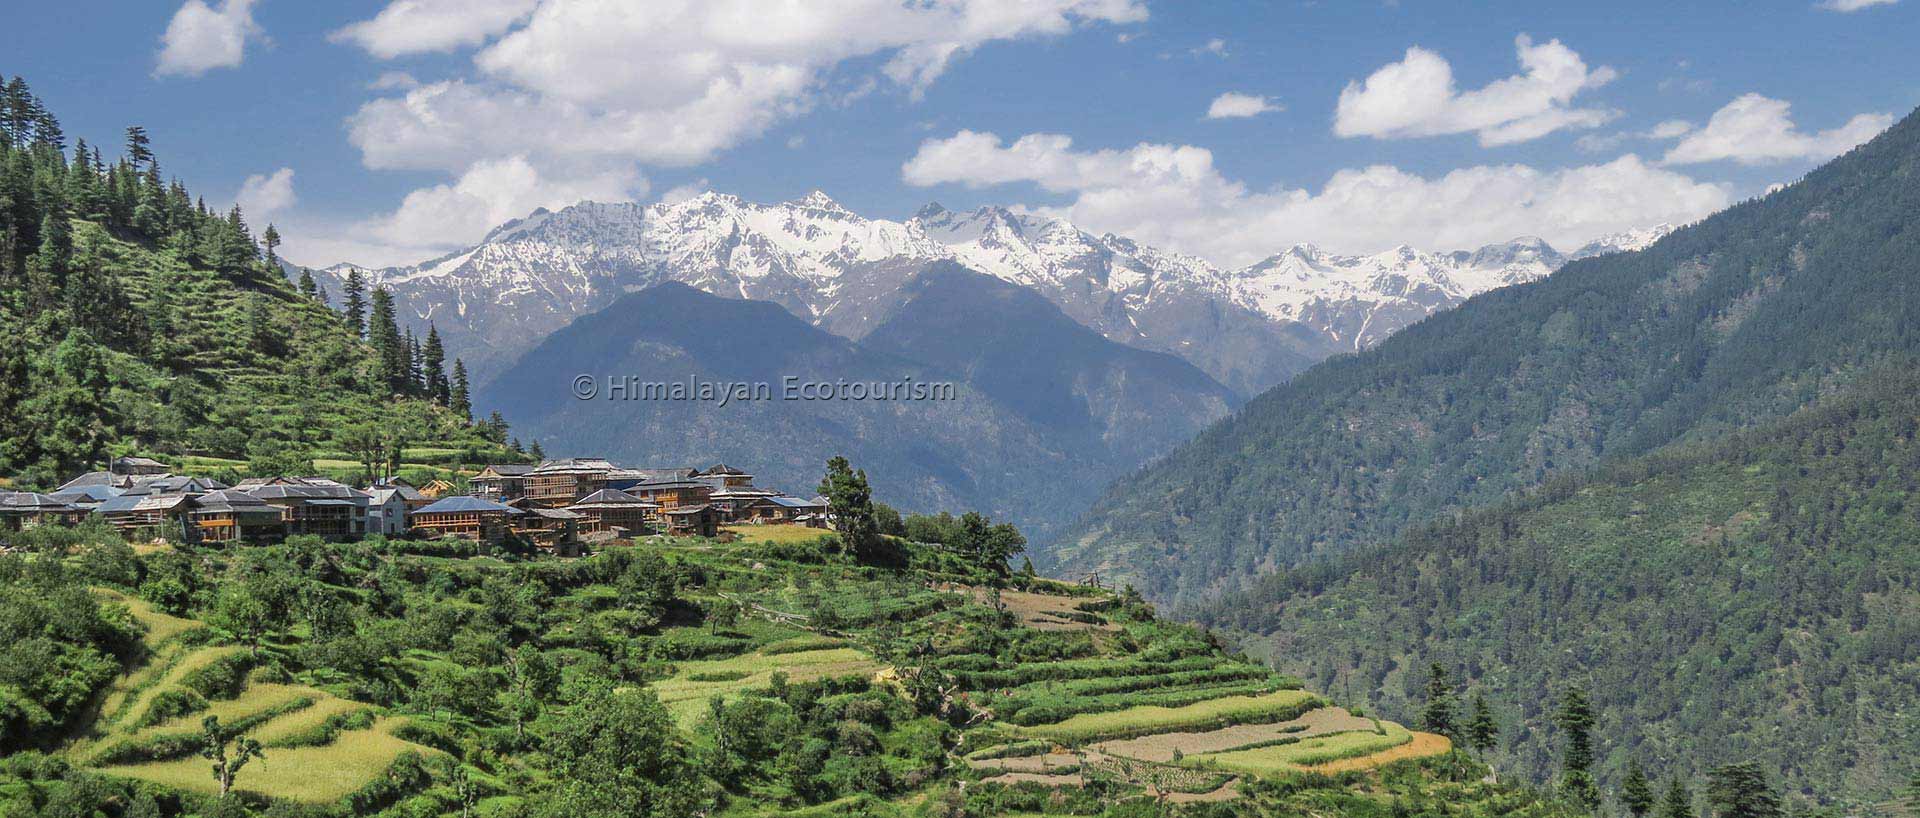 View of Sarchi village in the Tirthan Valley